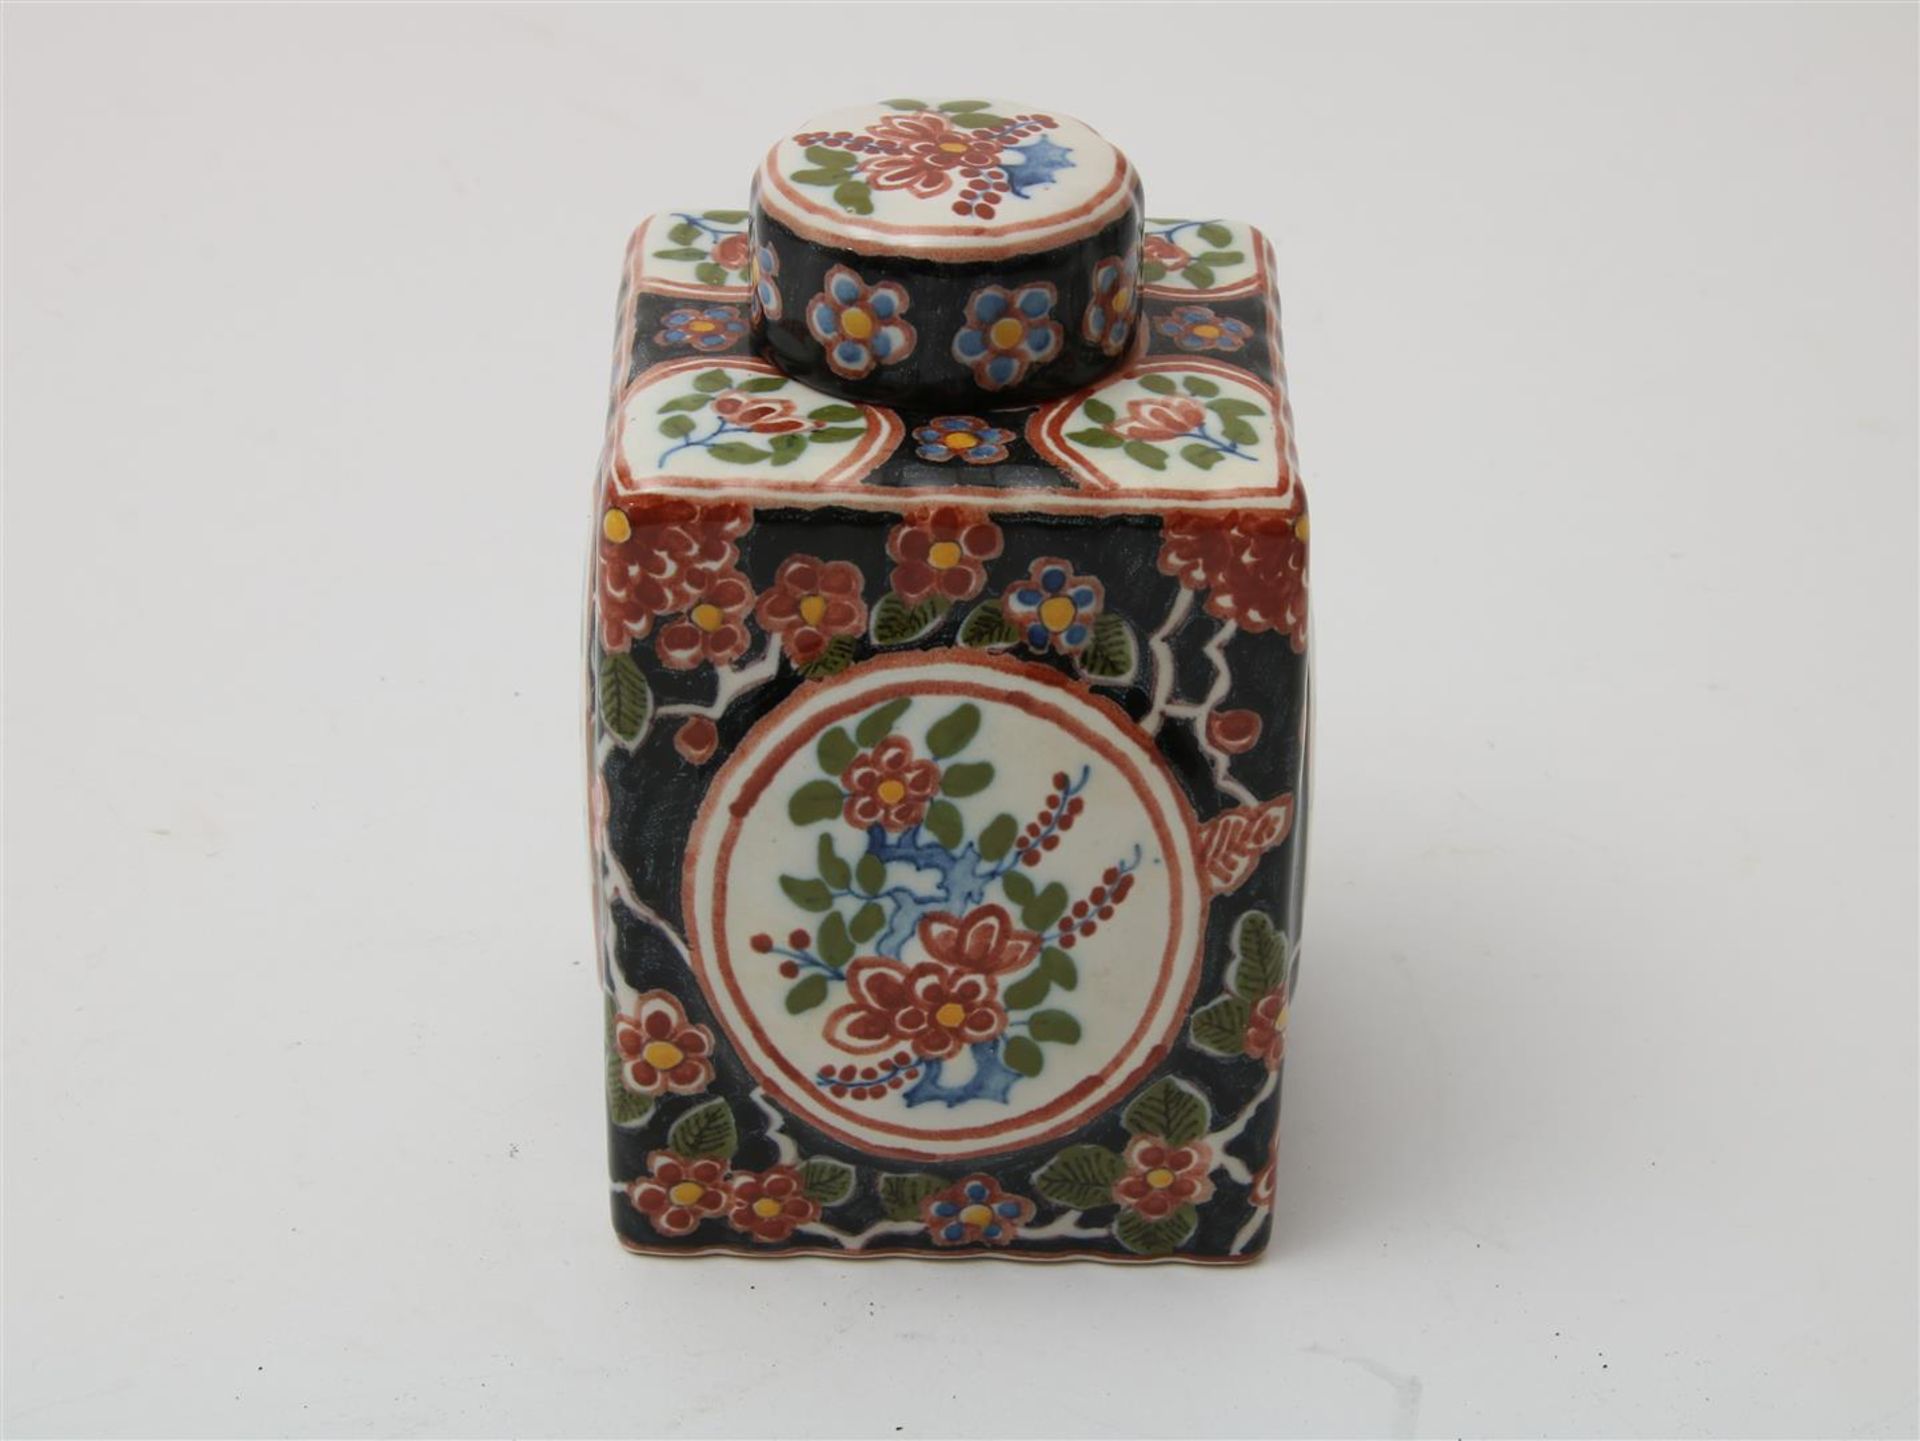 Lot of a polychrome earthenware candlestick, h. 21 cm., polychrome earthenware tea caddy, h. 13 - Image 6 of 9